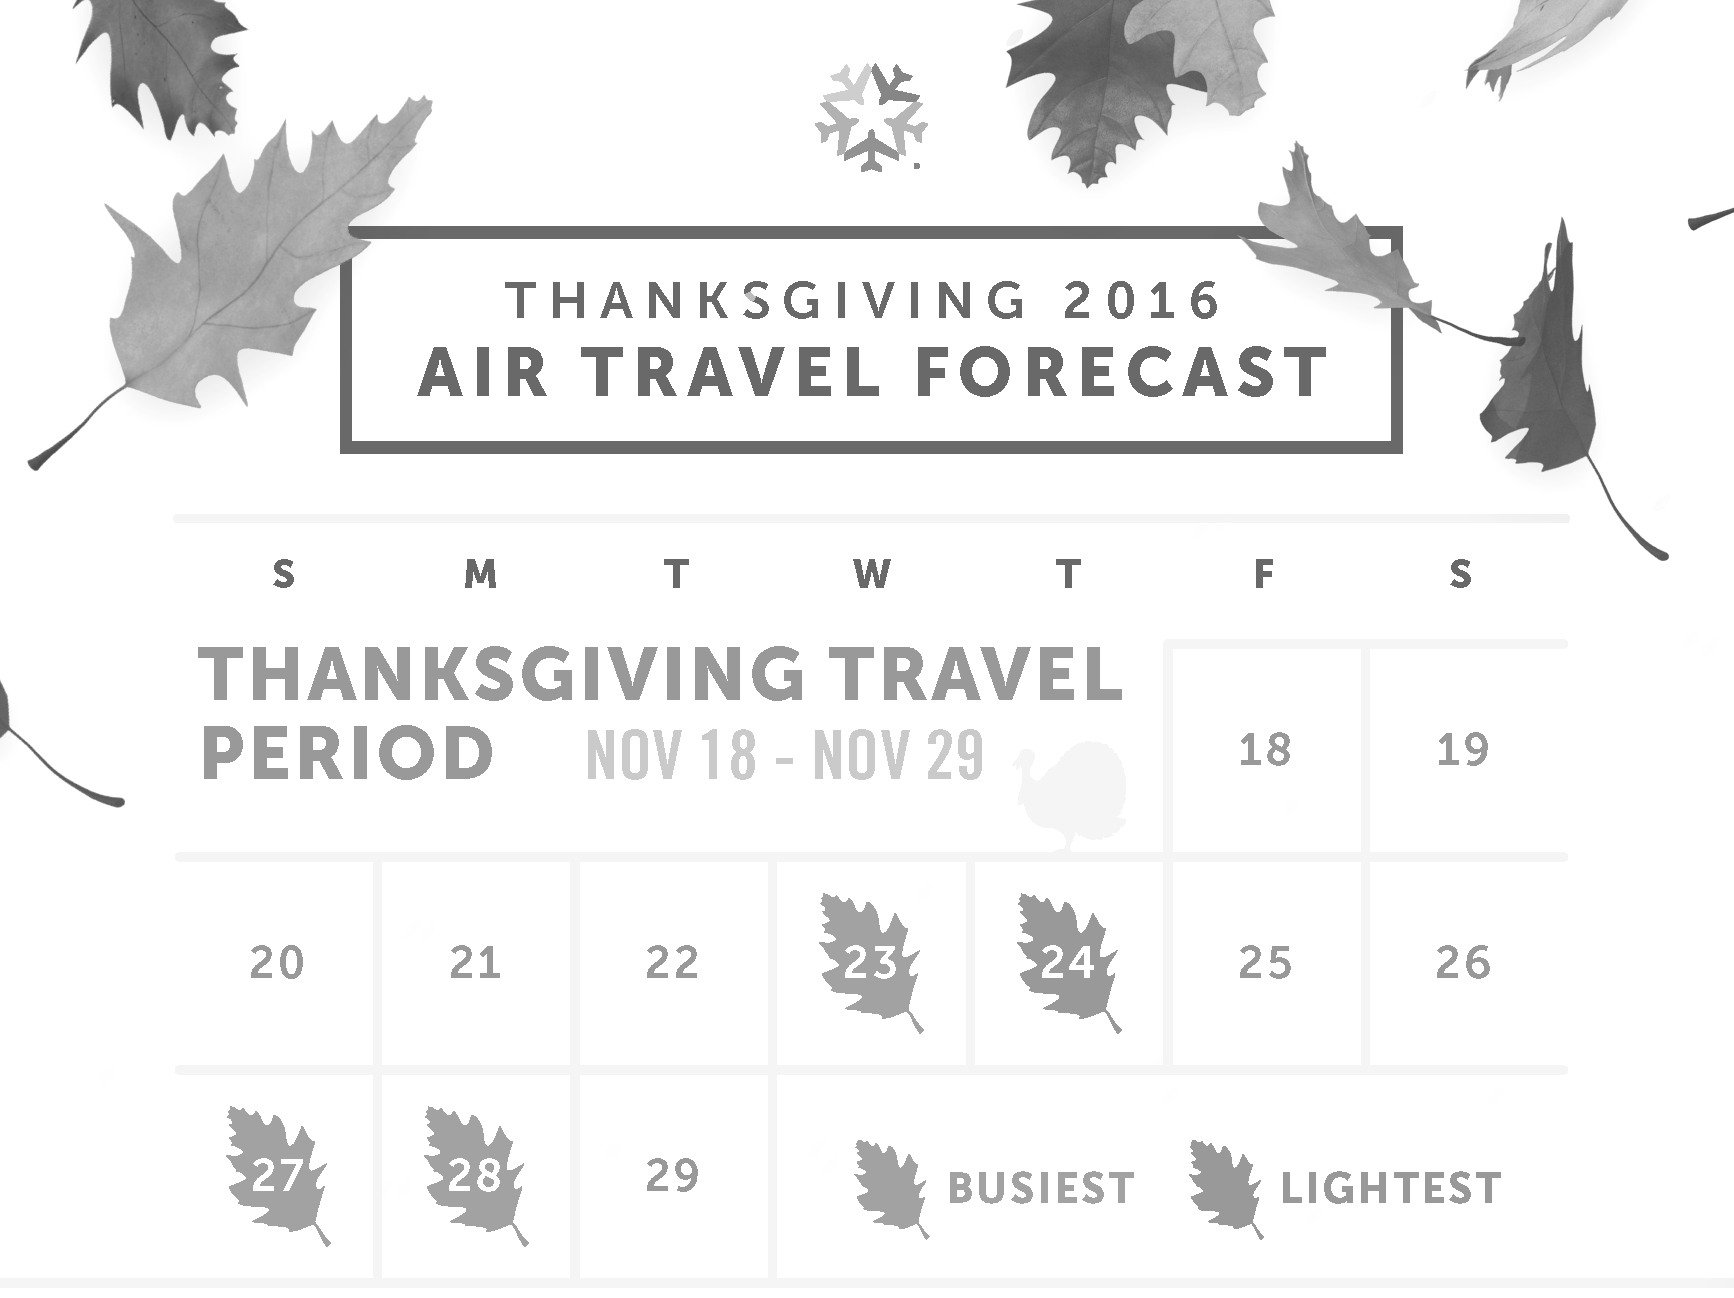 a4a_thanksgiving2016forecast